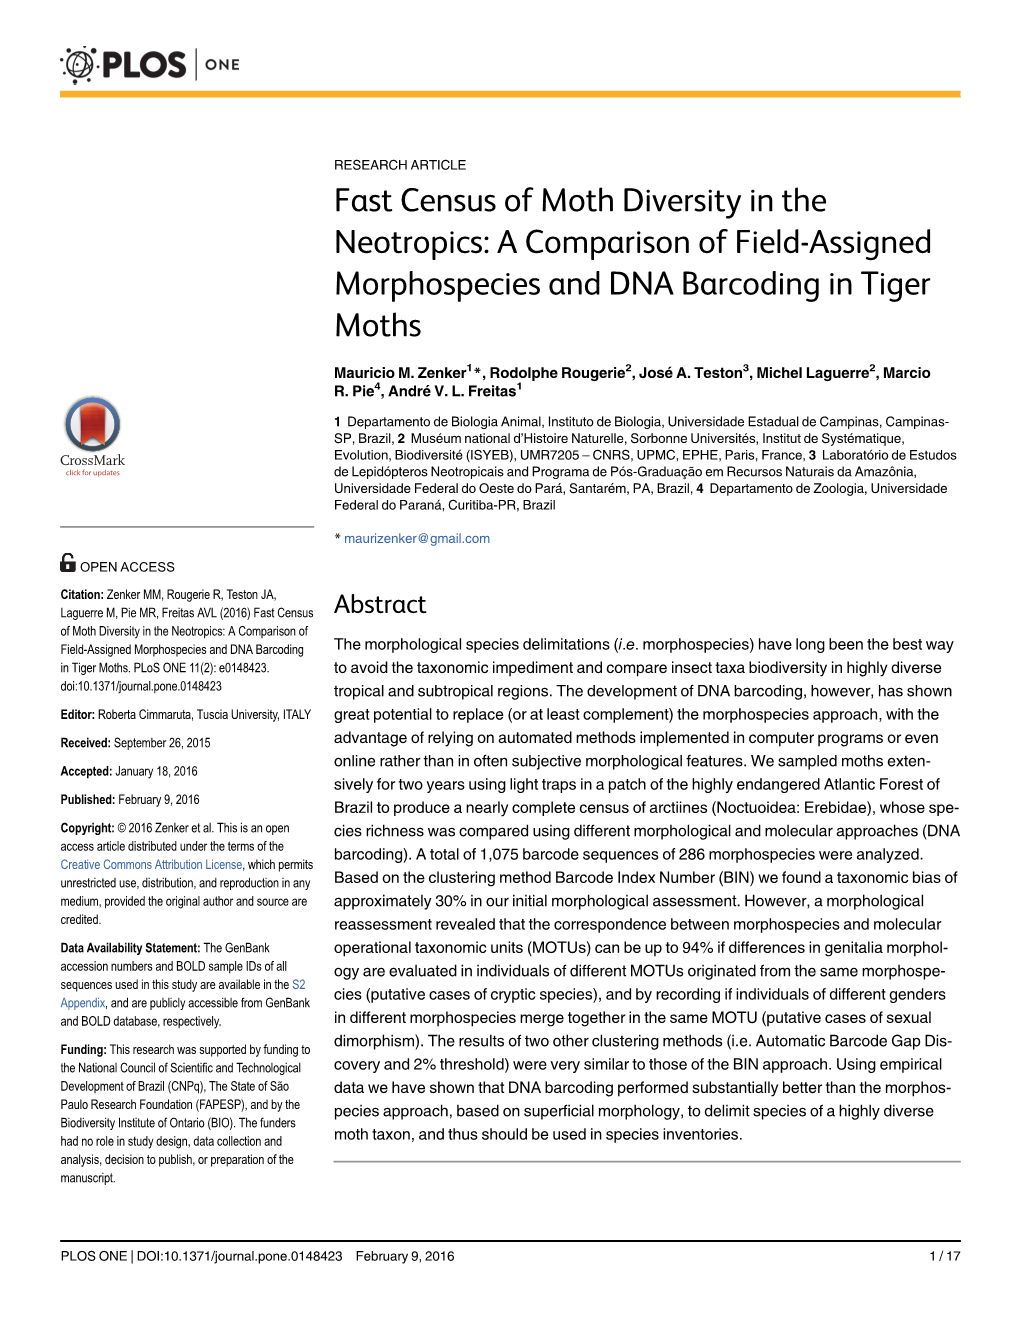 moth diversity research paper